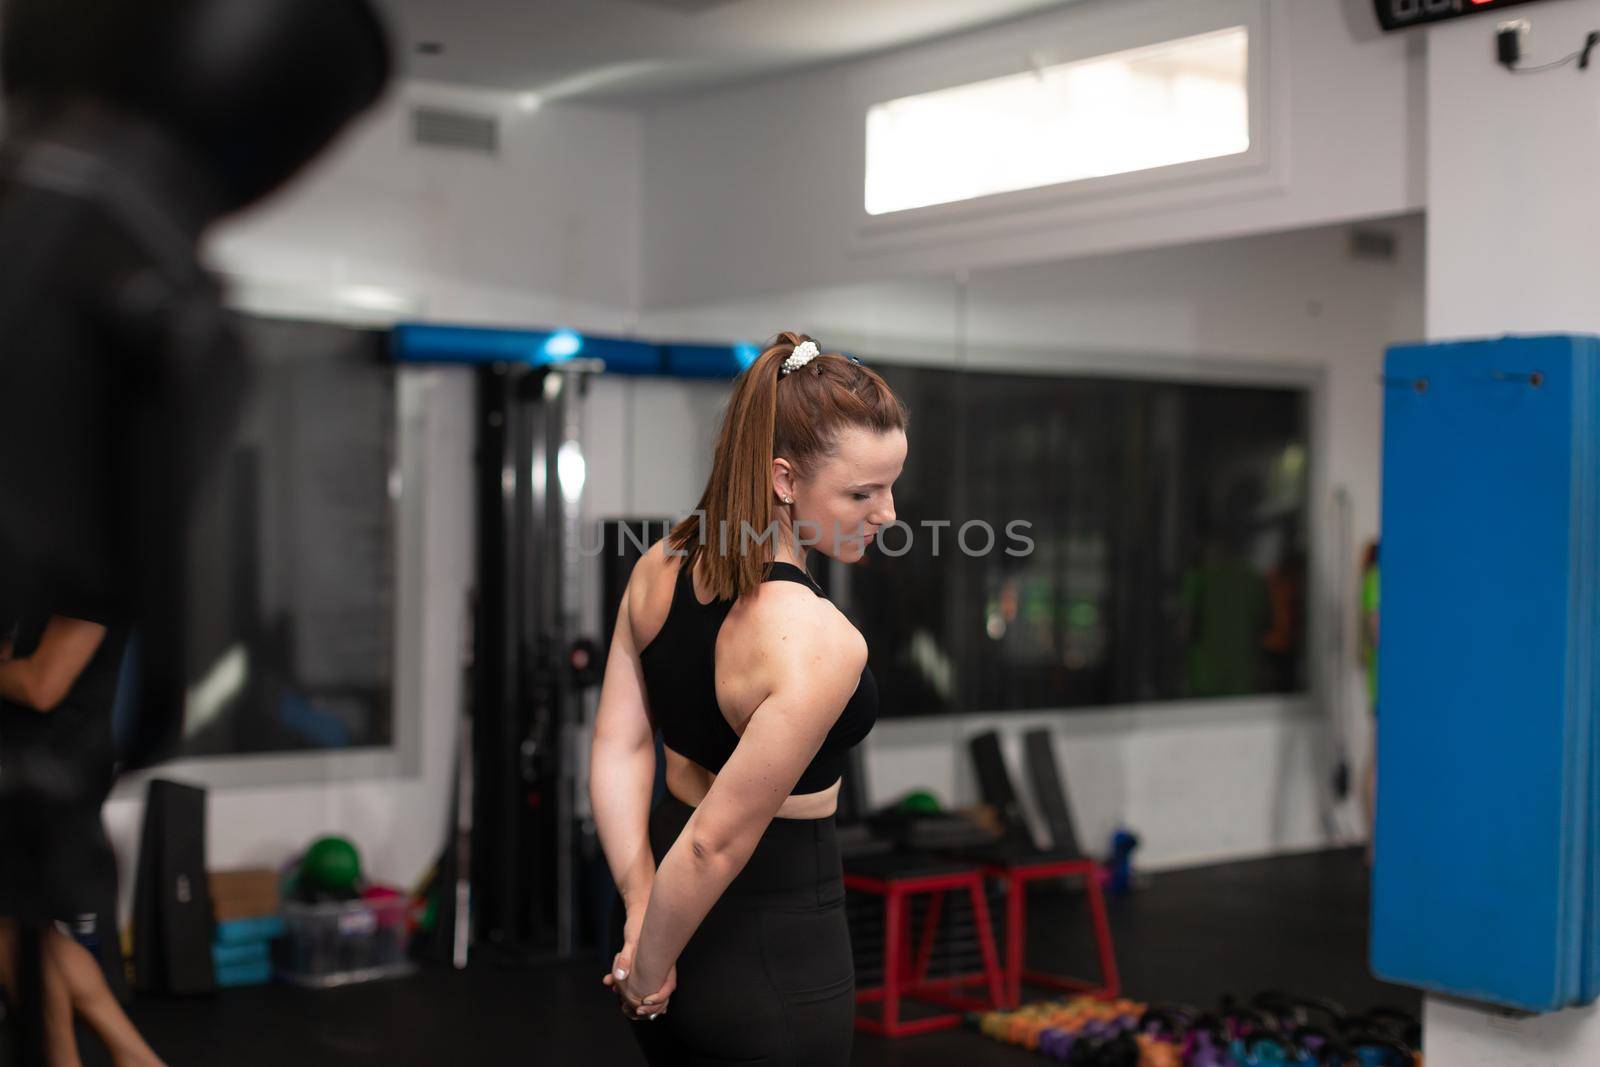 A female trainee stretching her arms before exercising by stockrojoverdeyazul